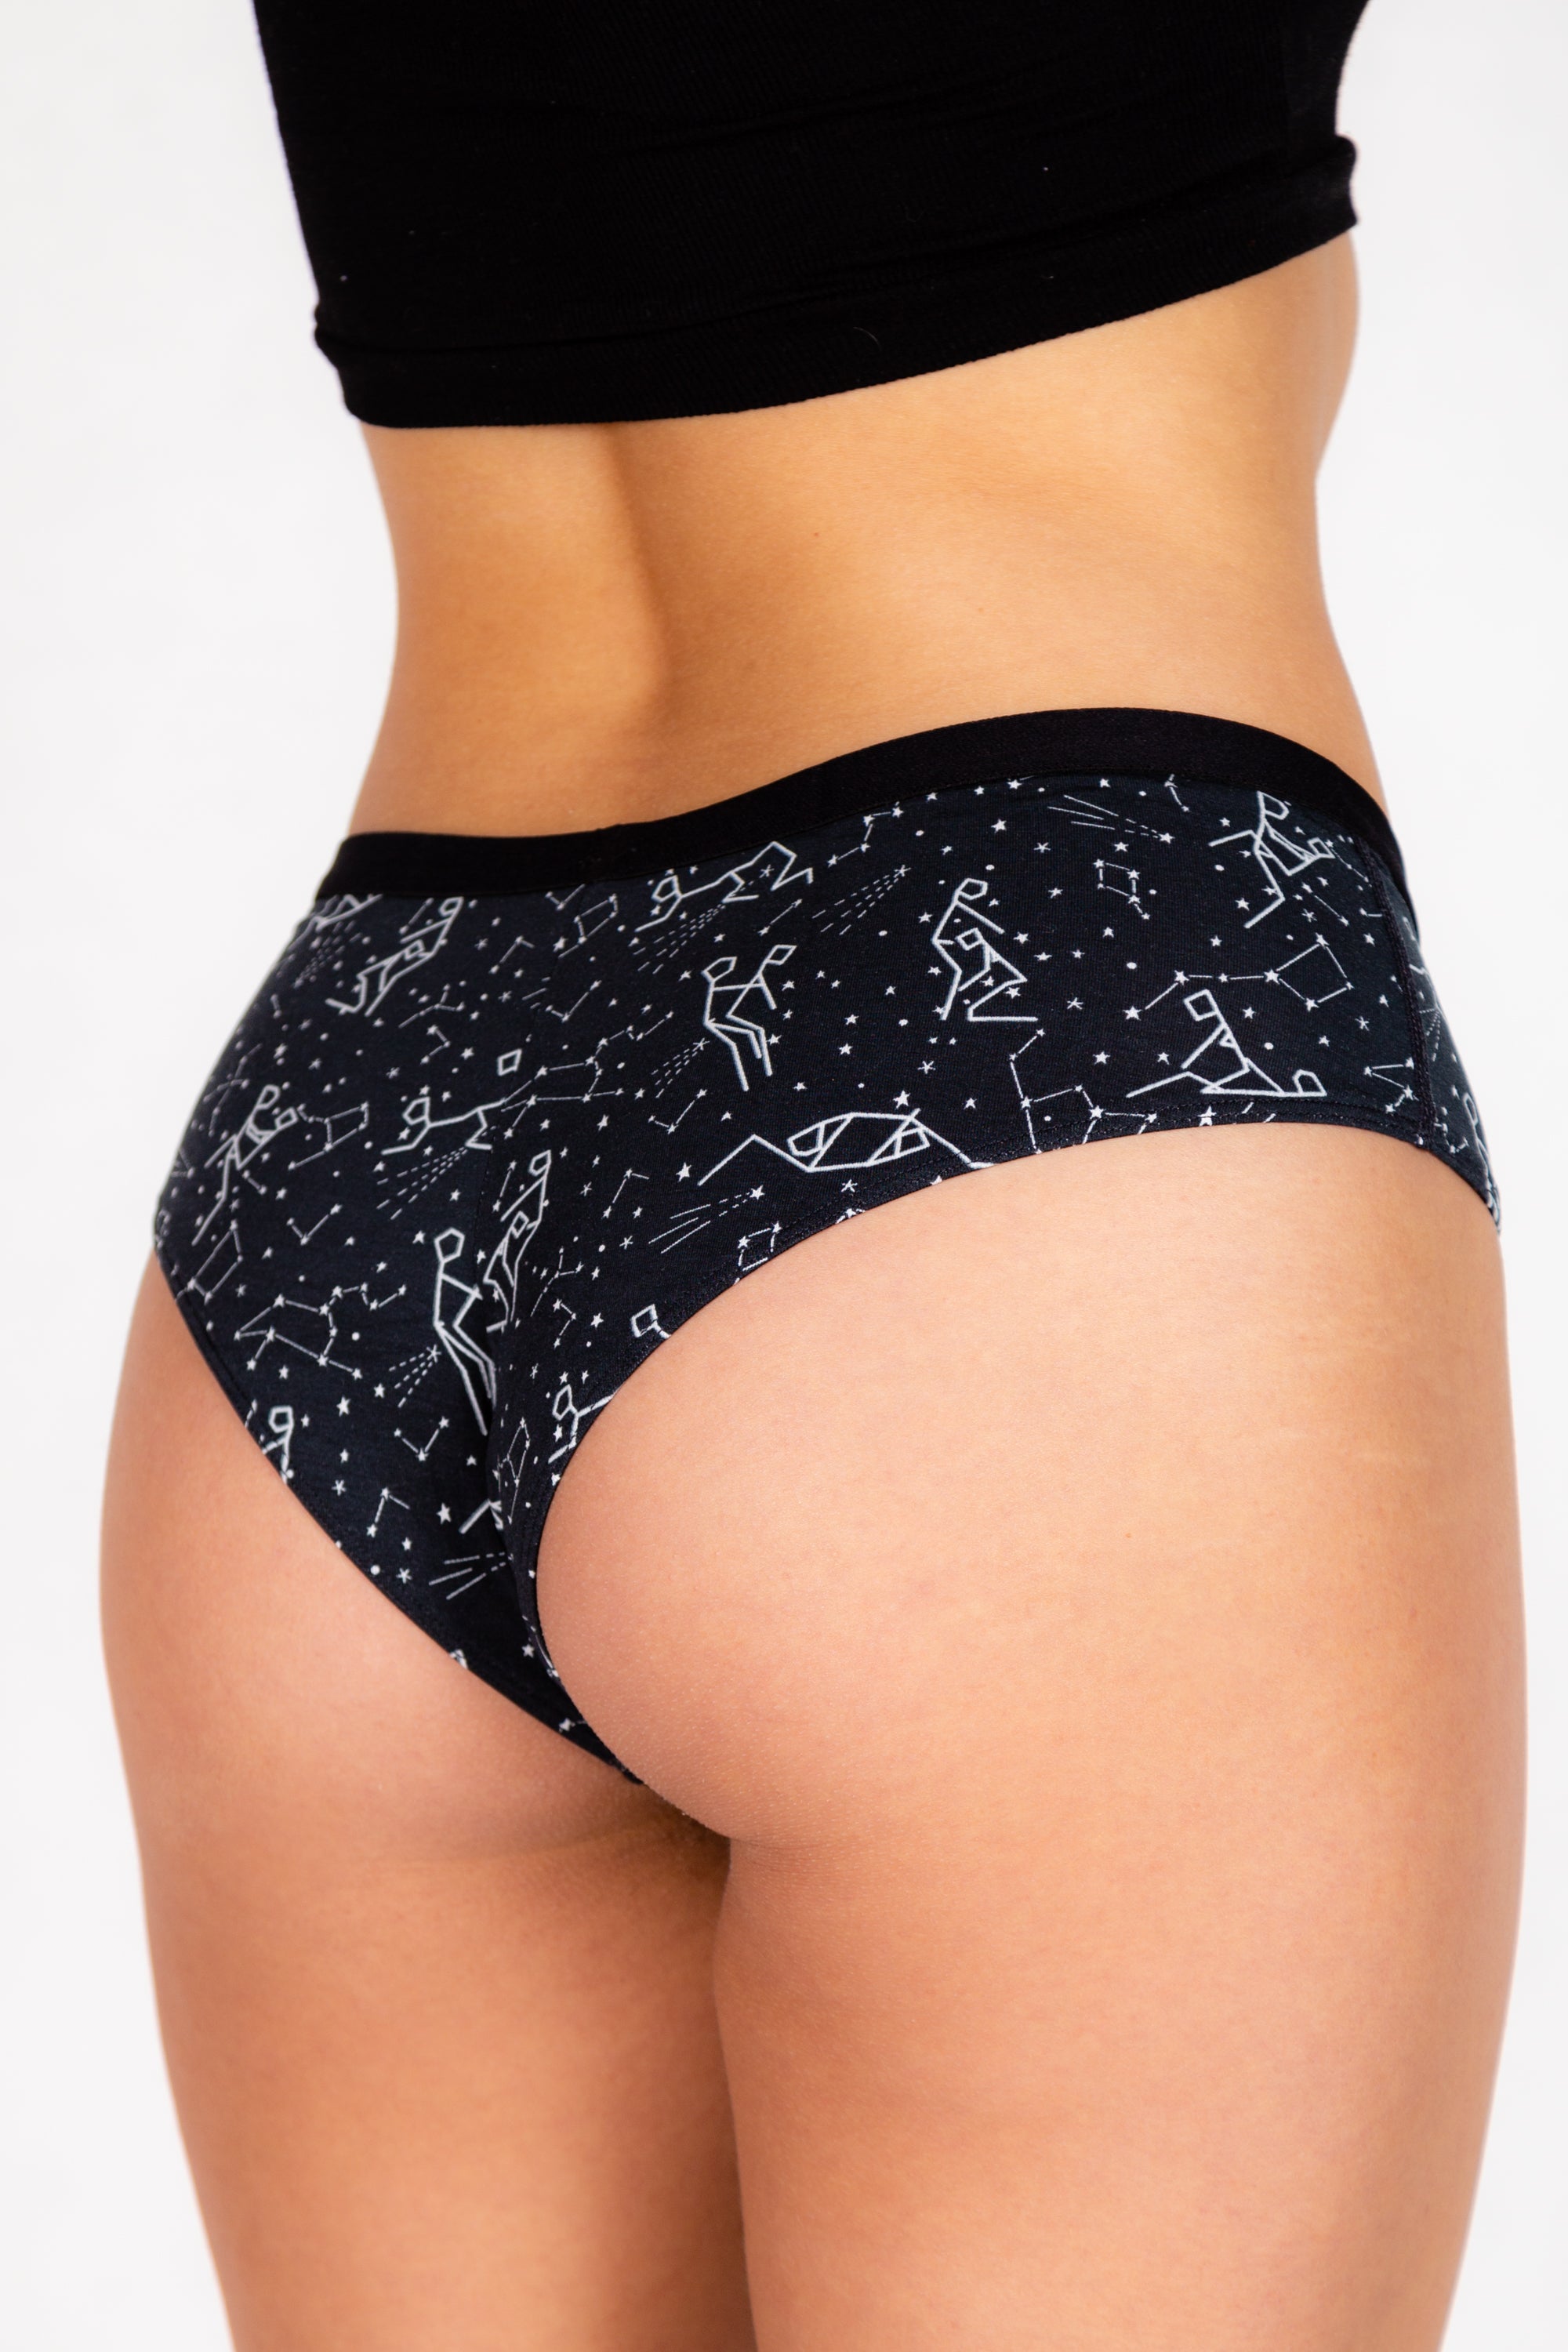 Constellation Ball Hammock® Boxer With Fly and Cheeky Matching Couples  Underwear Pack